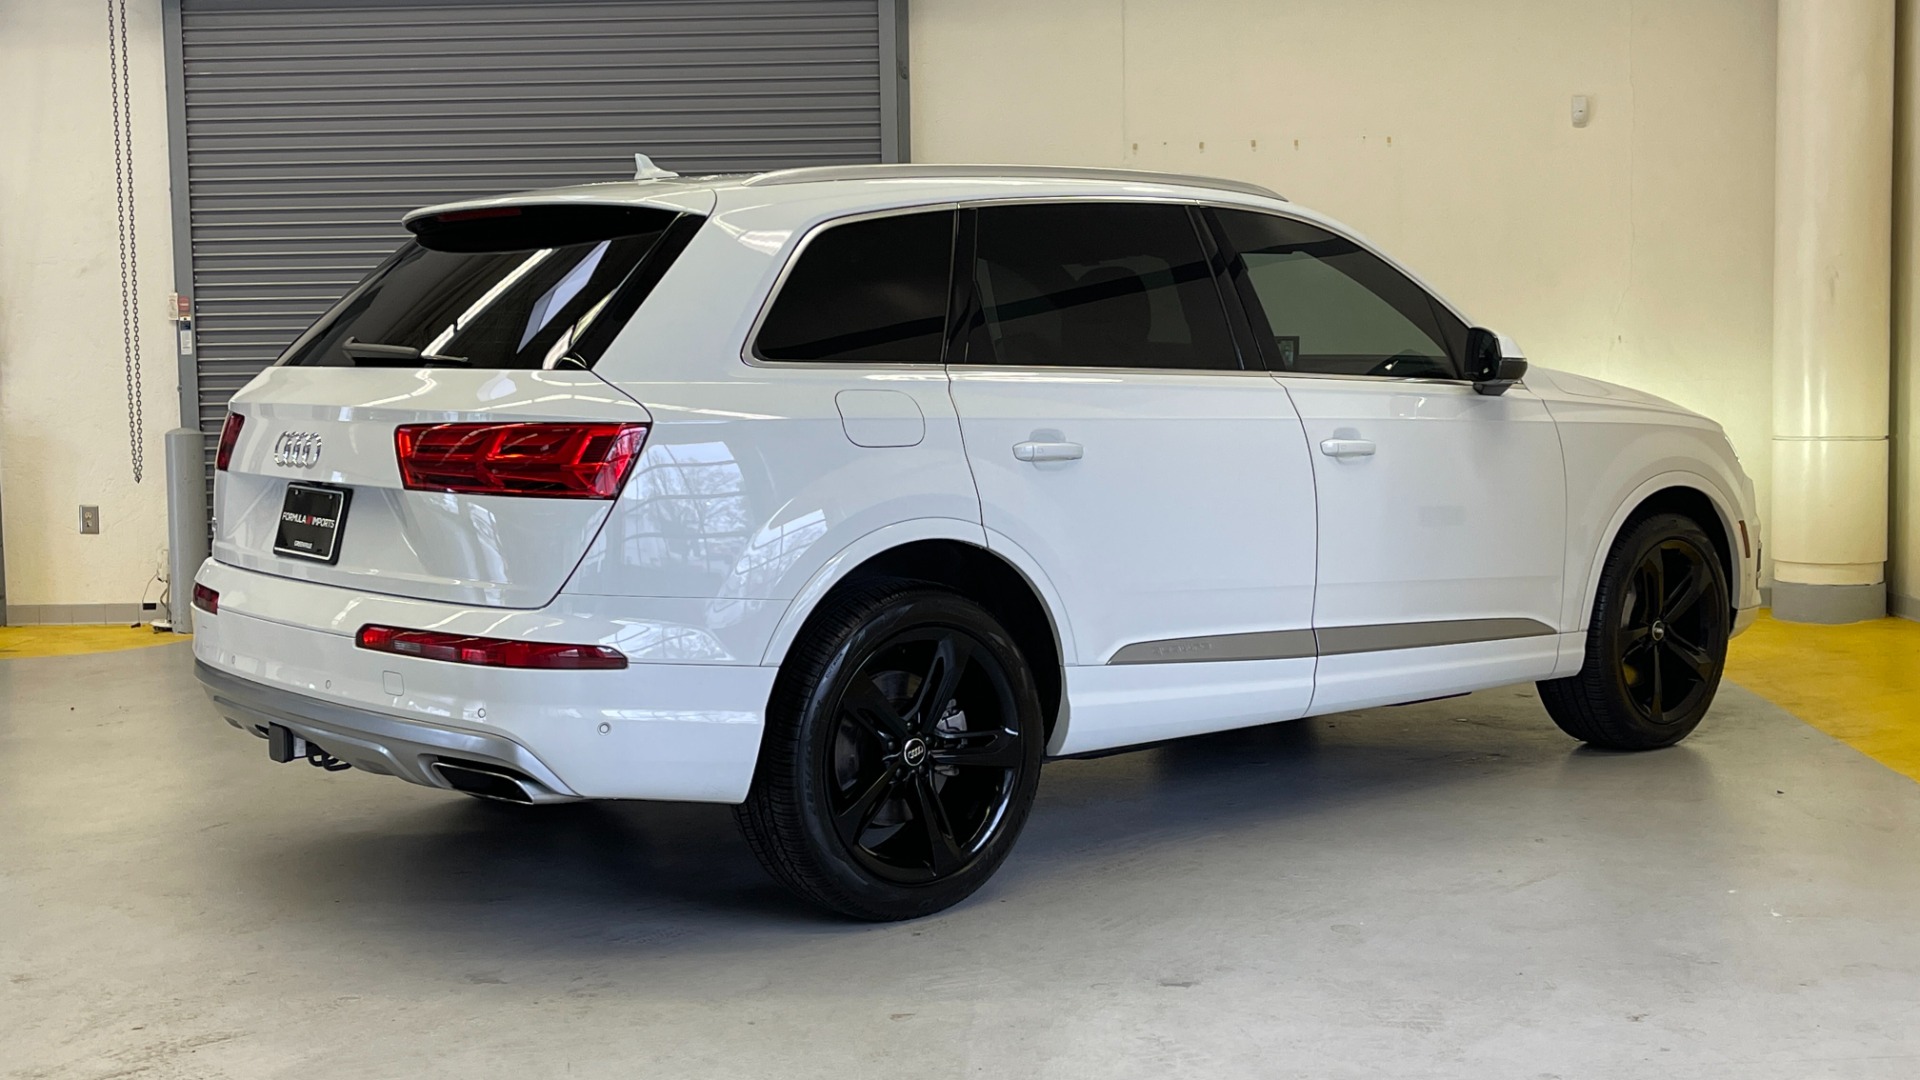 Used 2019 Audi Q7 PRESTIGE / NAV / SUNROOF / LANE ASST / TOWING / 21-IN WHLS / REA for sale $63,695 at Formula Imports in Charlotte NC 28227 6